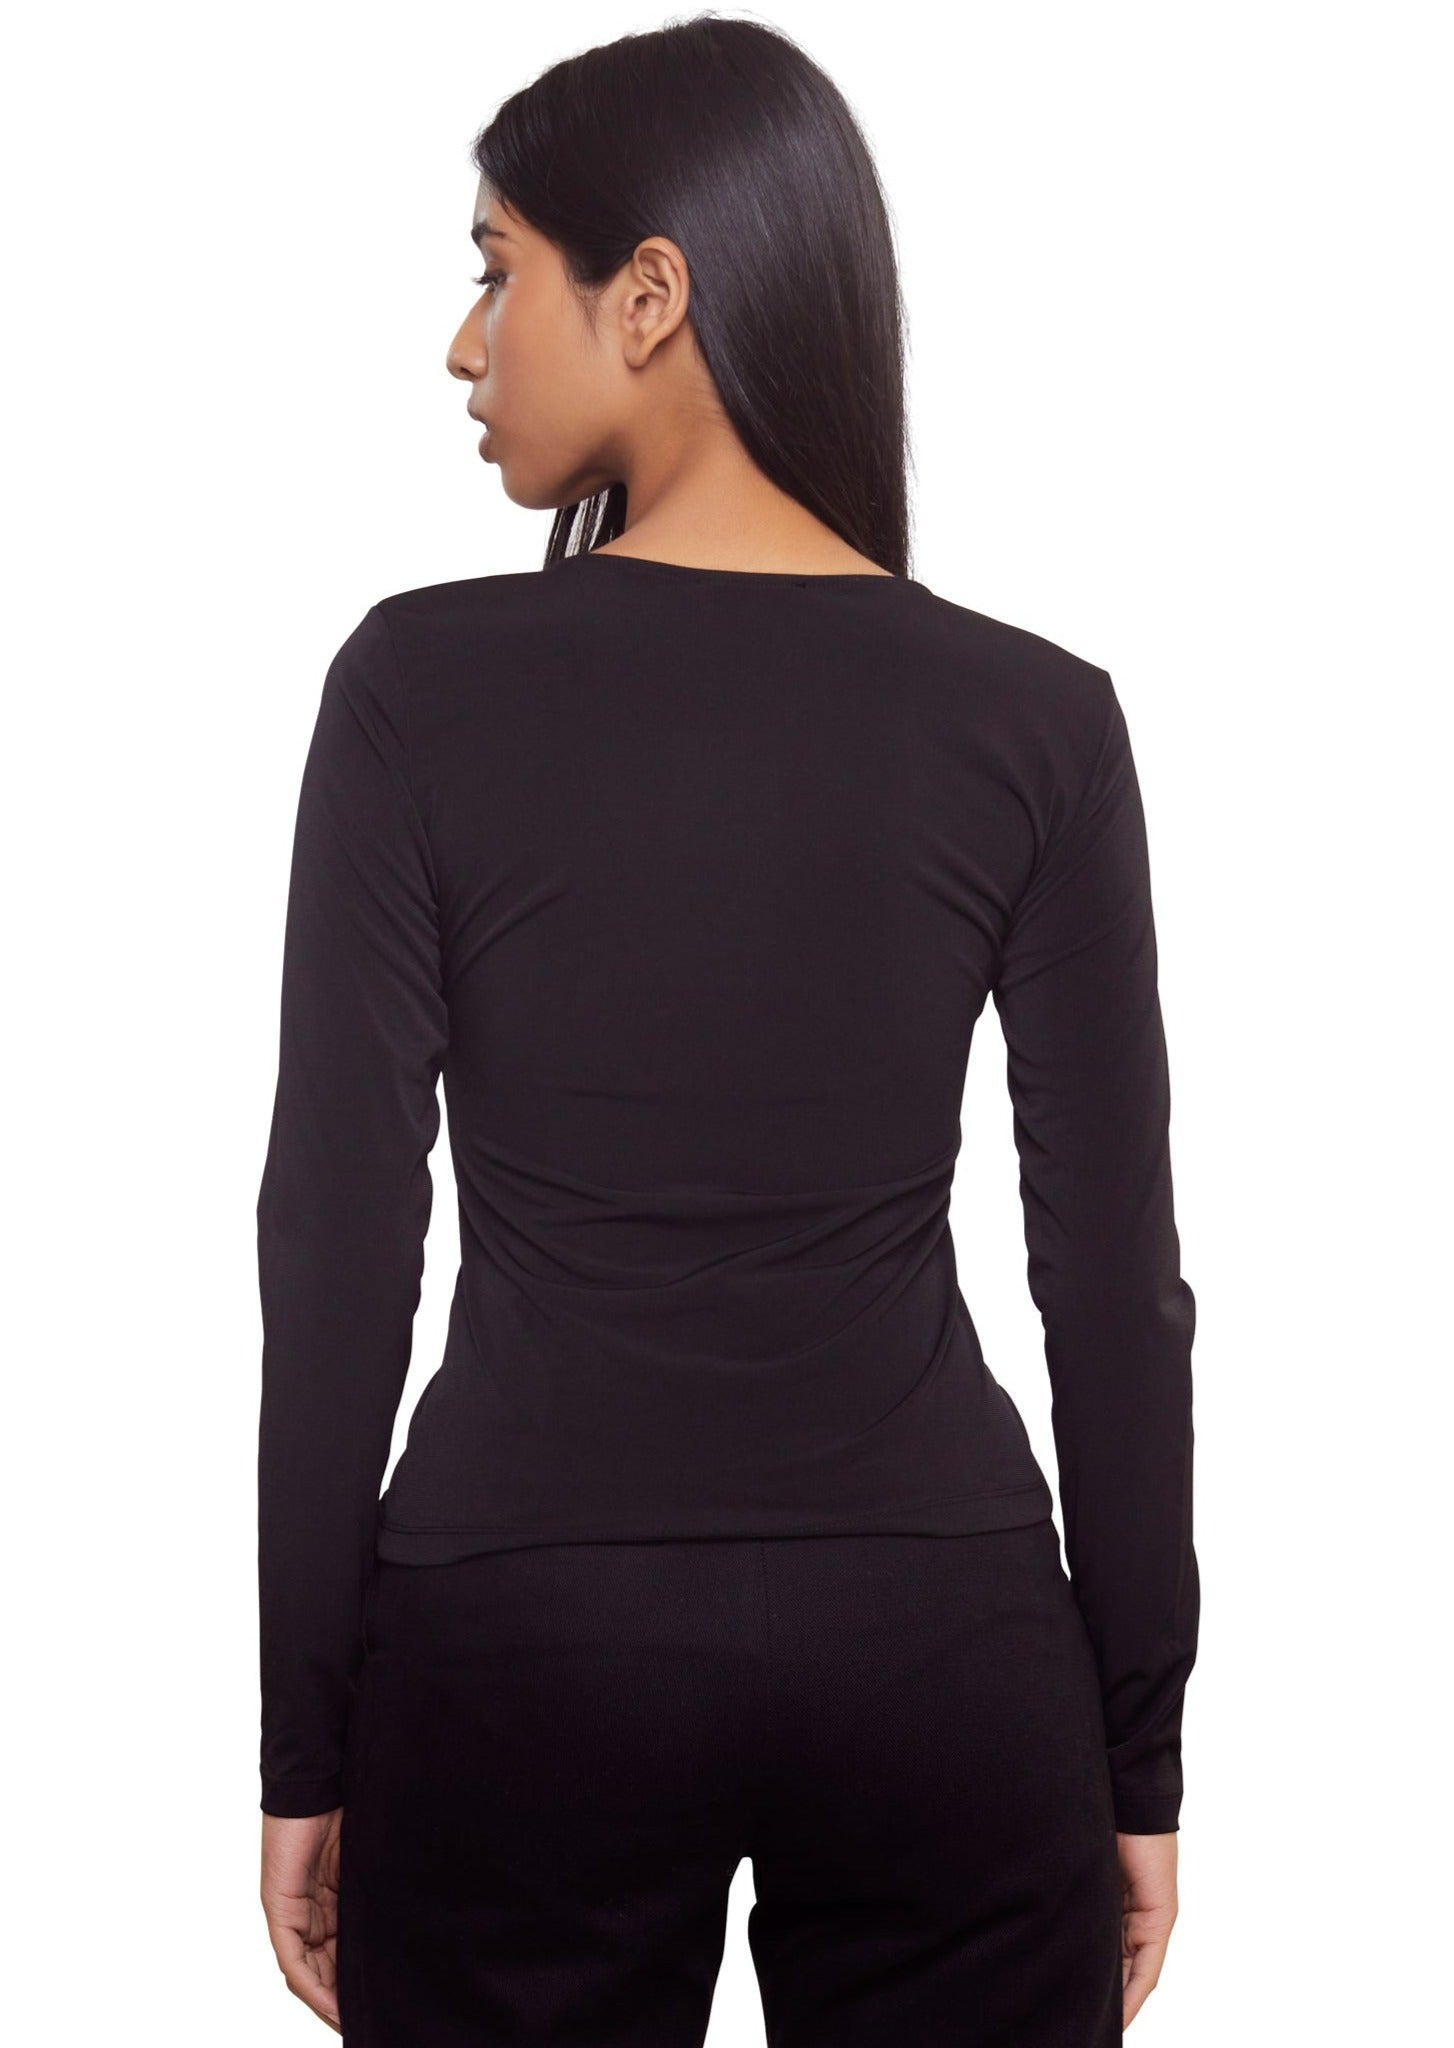 Black long sleeves v neck top with three rings from the brand Musier